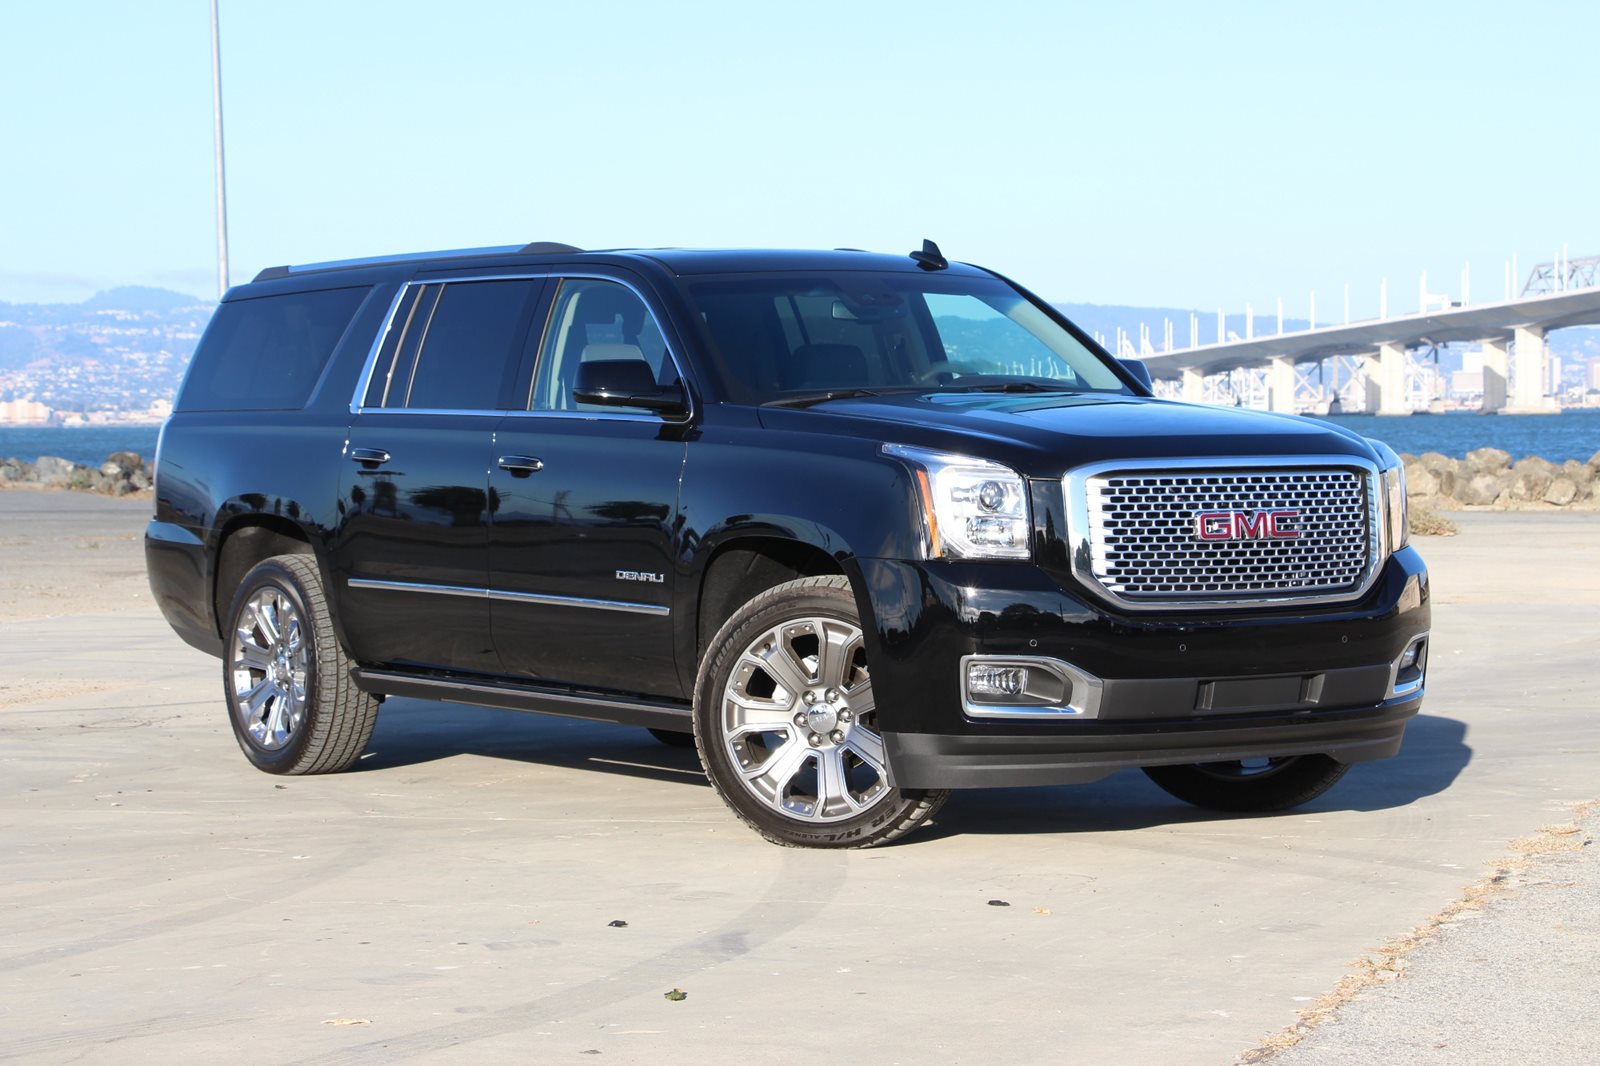 2016 Yukon XL Denali Review: We Discovered Why People Love Full-Size